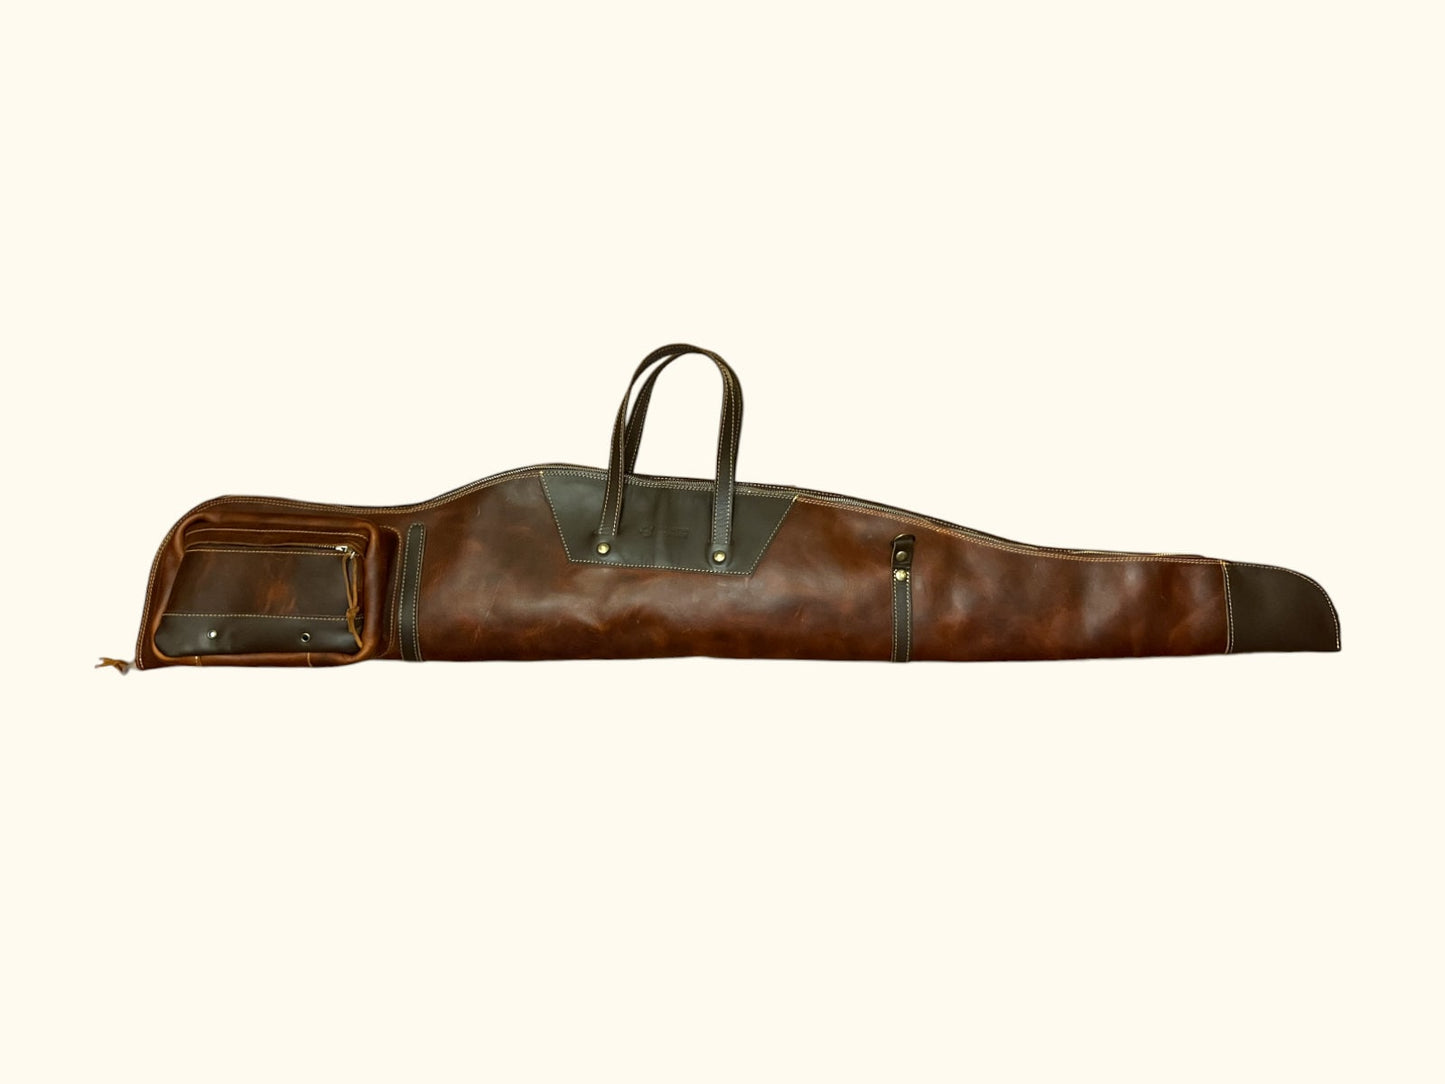 40 inch to 60 inch | Handmade | Leather Rifle Bag | Canvas Rifle Bag | Waxed Canvas  | Leather | Rifle Bag | Hunting | Rifle | Gun case  | Personalization  99percenthandmade   